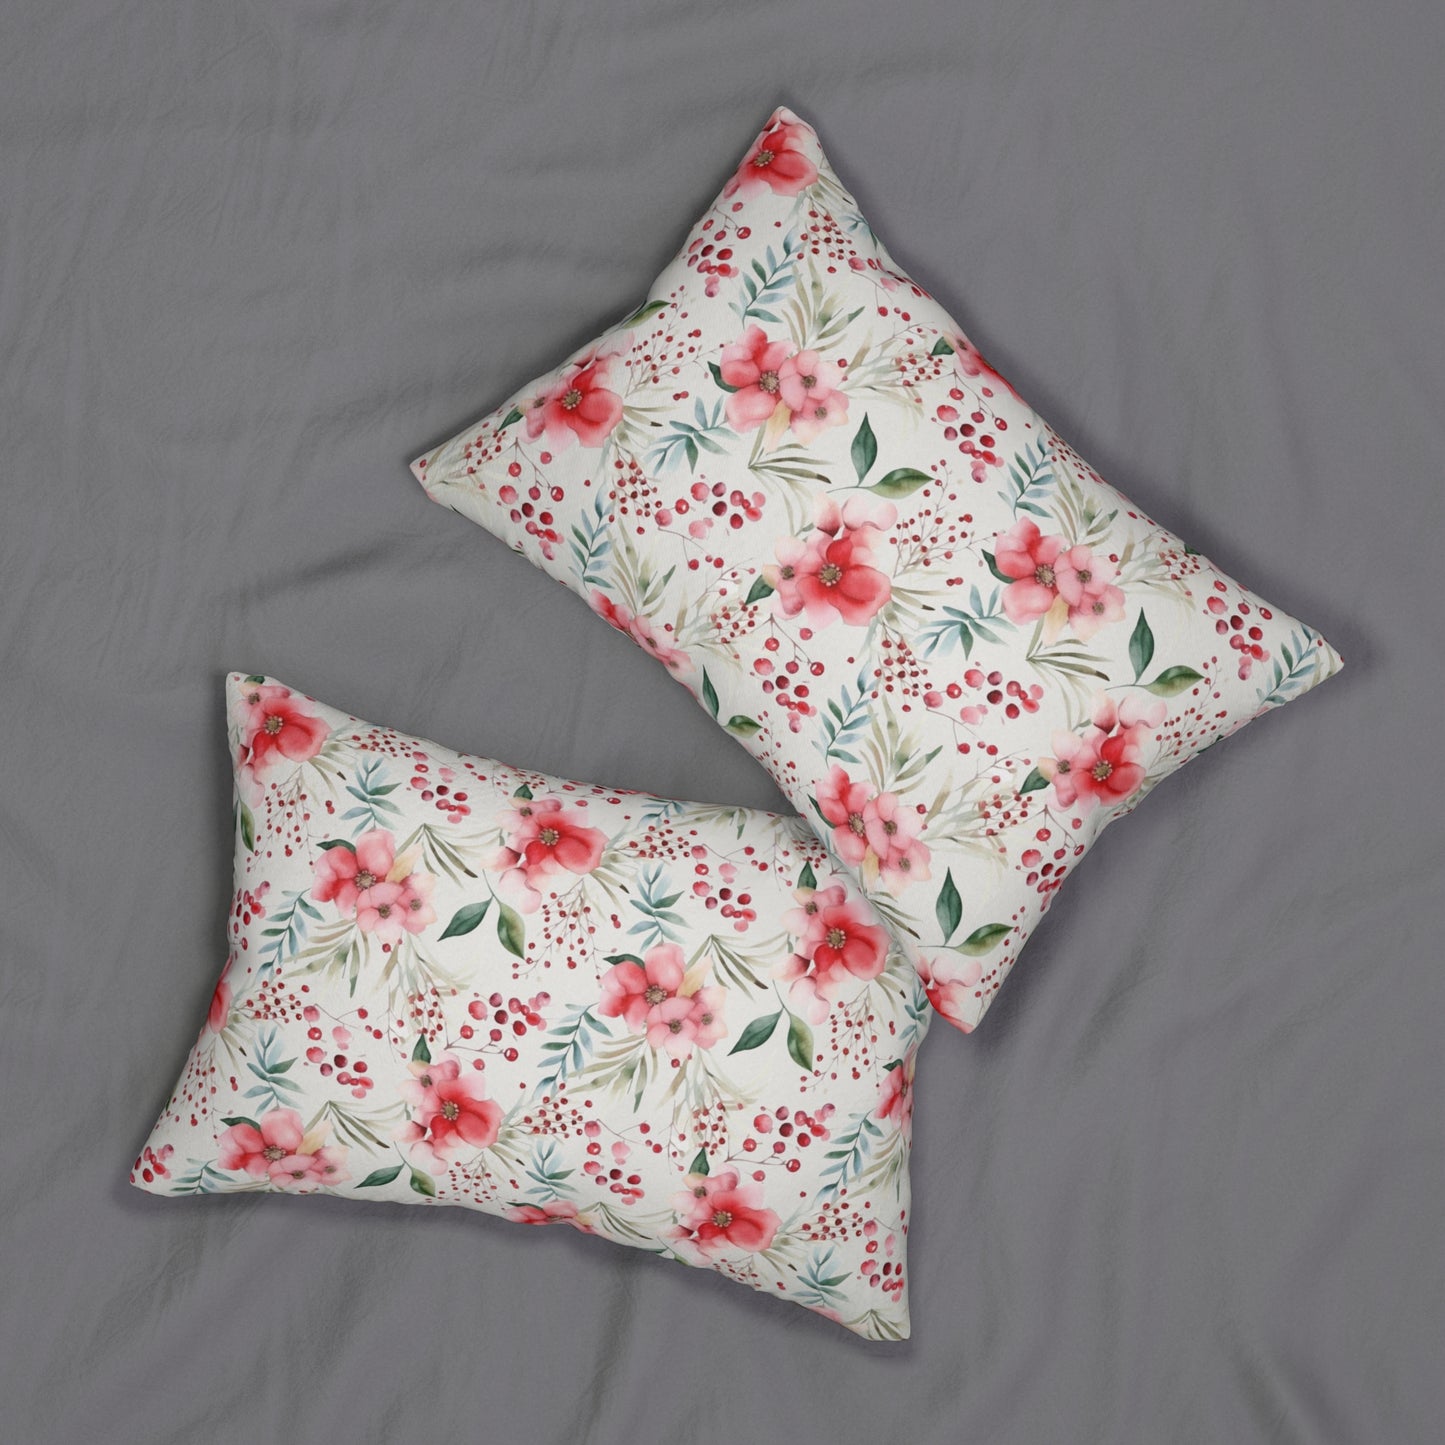 Floral and Cranberries- Lumbar Pillow or Breastfeeding